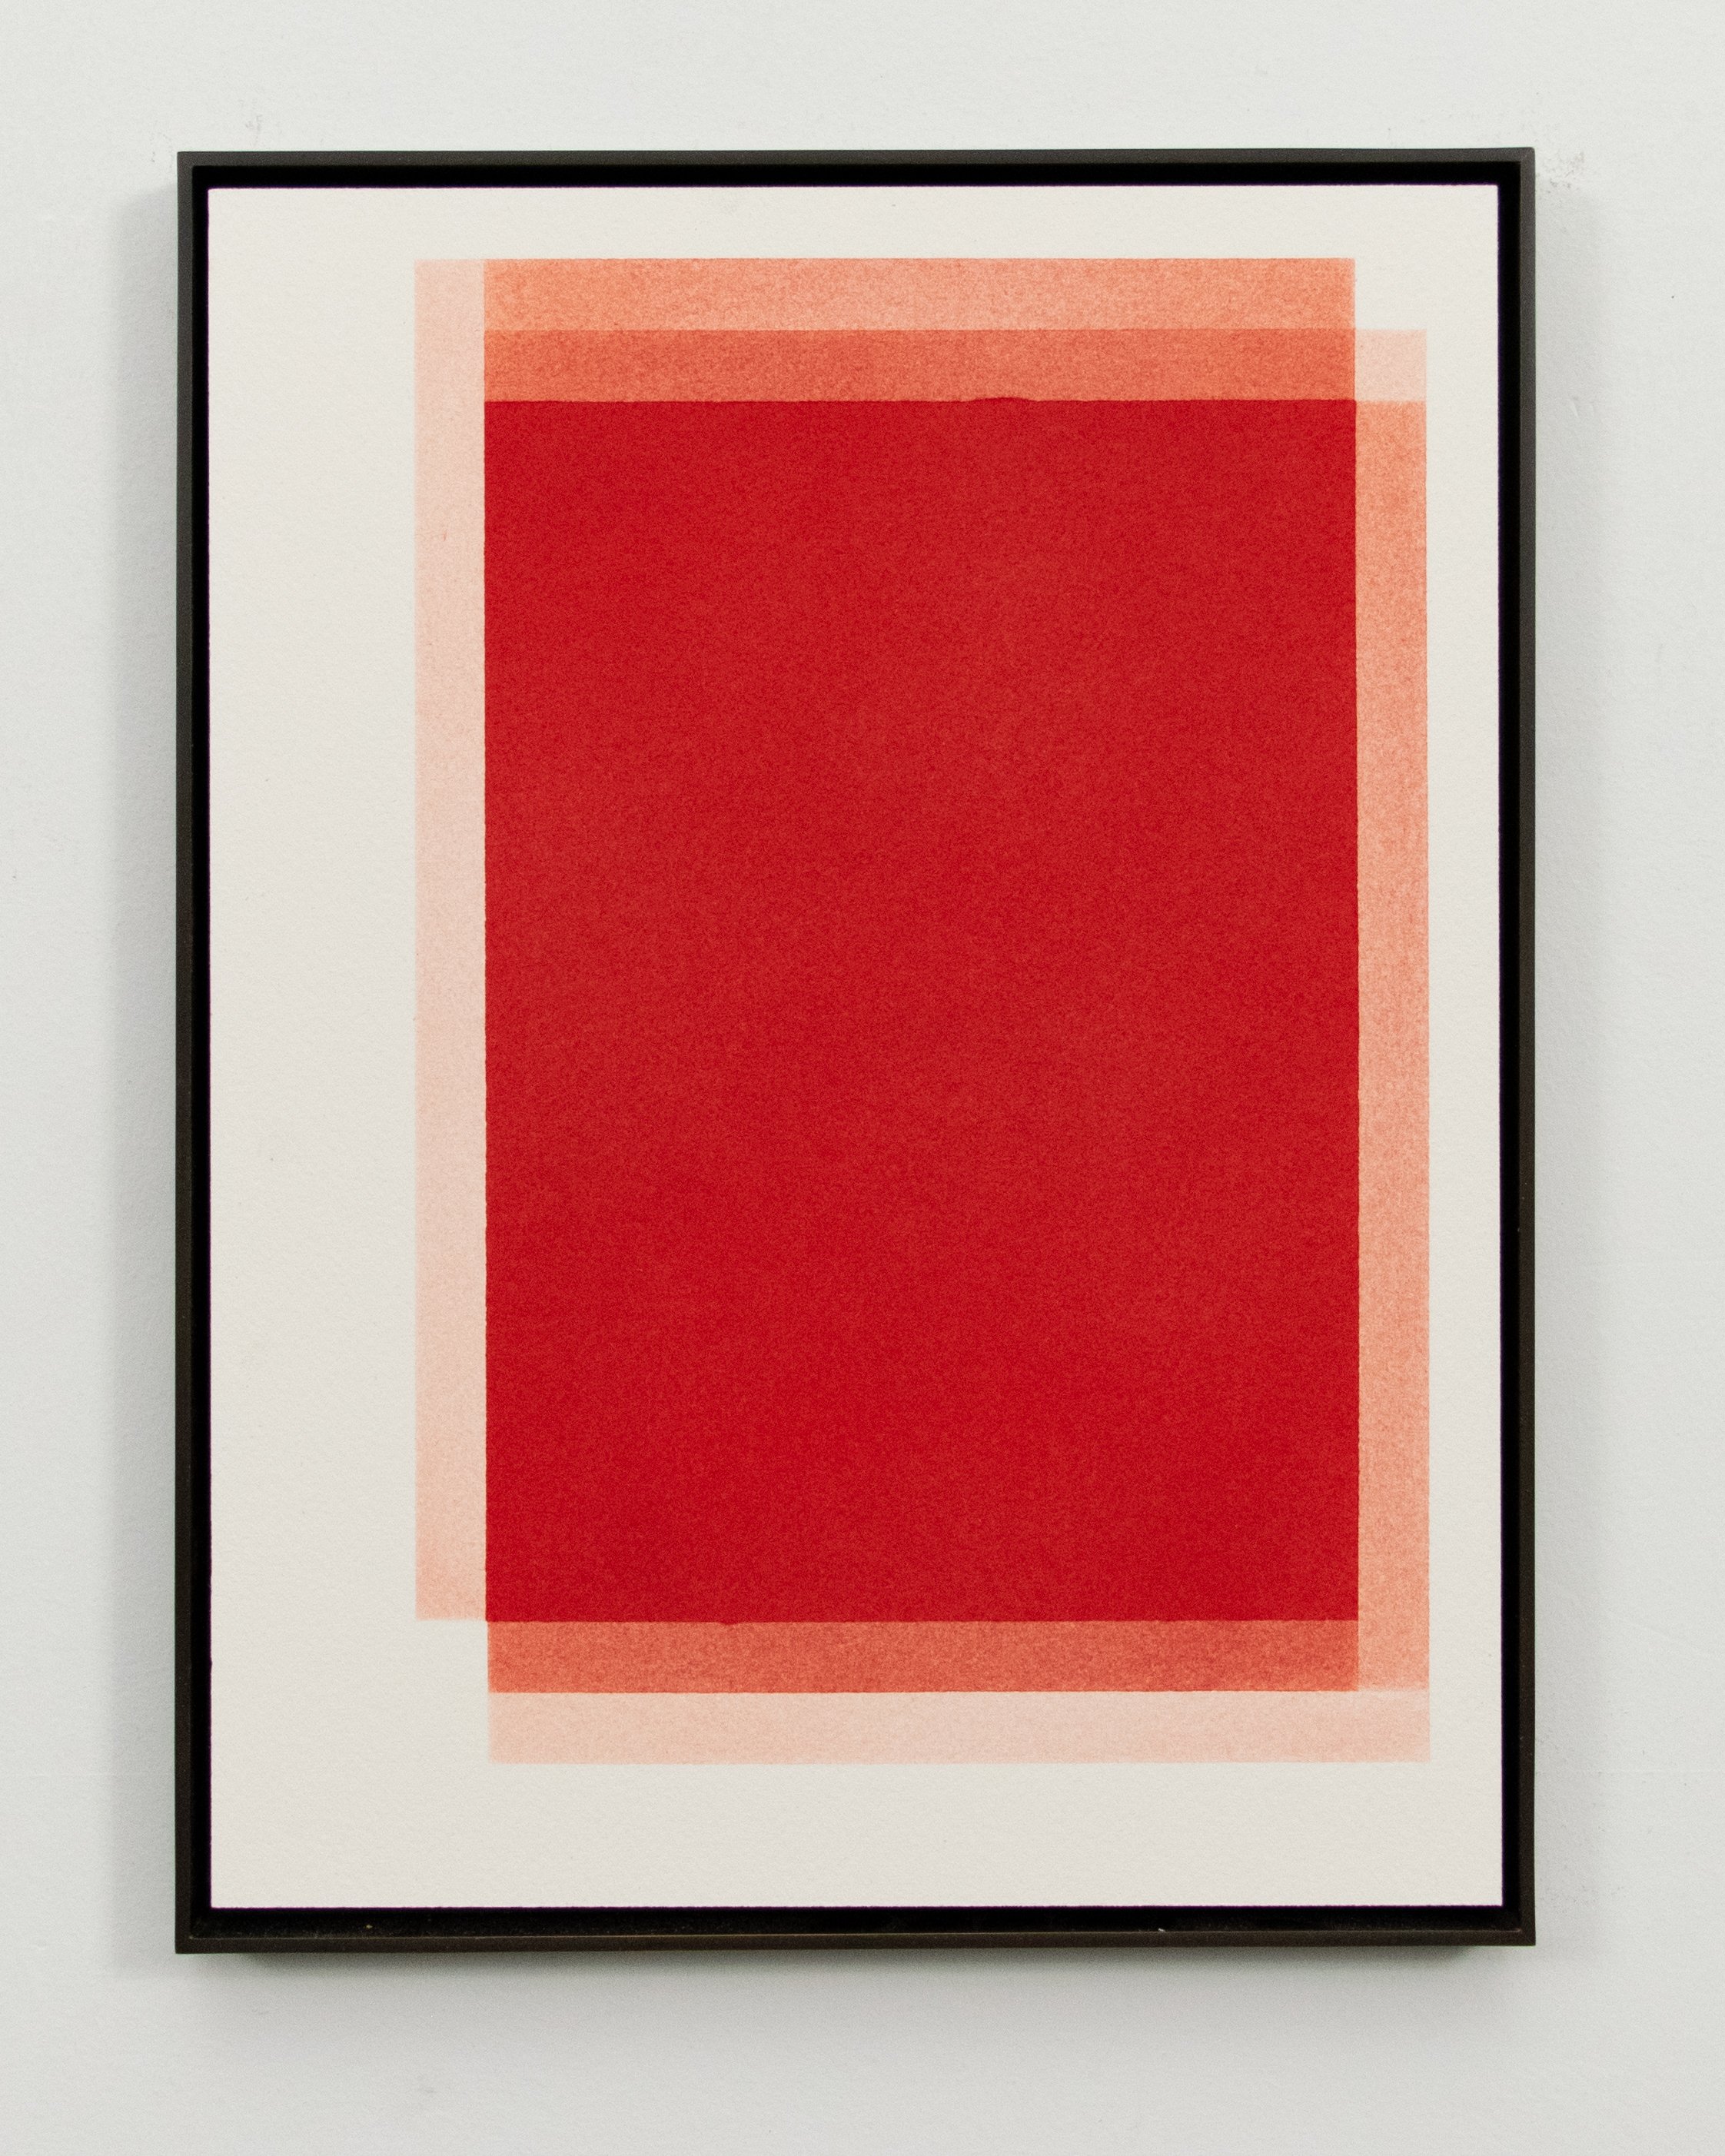  Stephen Somple  9 1 2 17 Red , 2022 Graphite and pigment on paper with oxidized brass frame 9.5" x 12.5" x .5" 